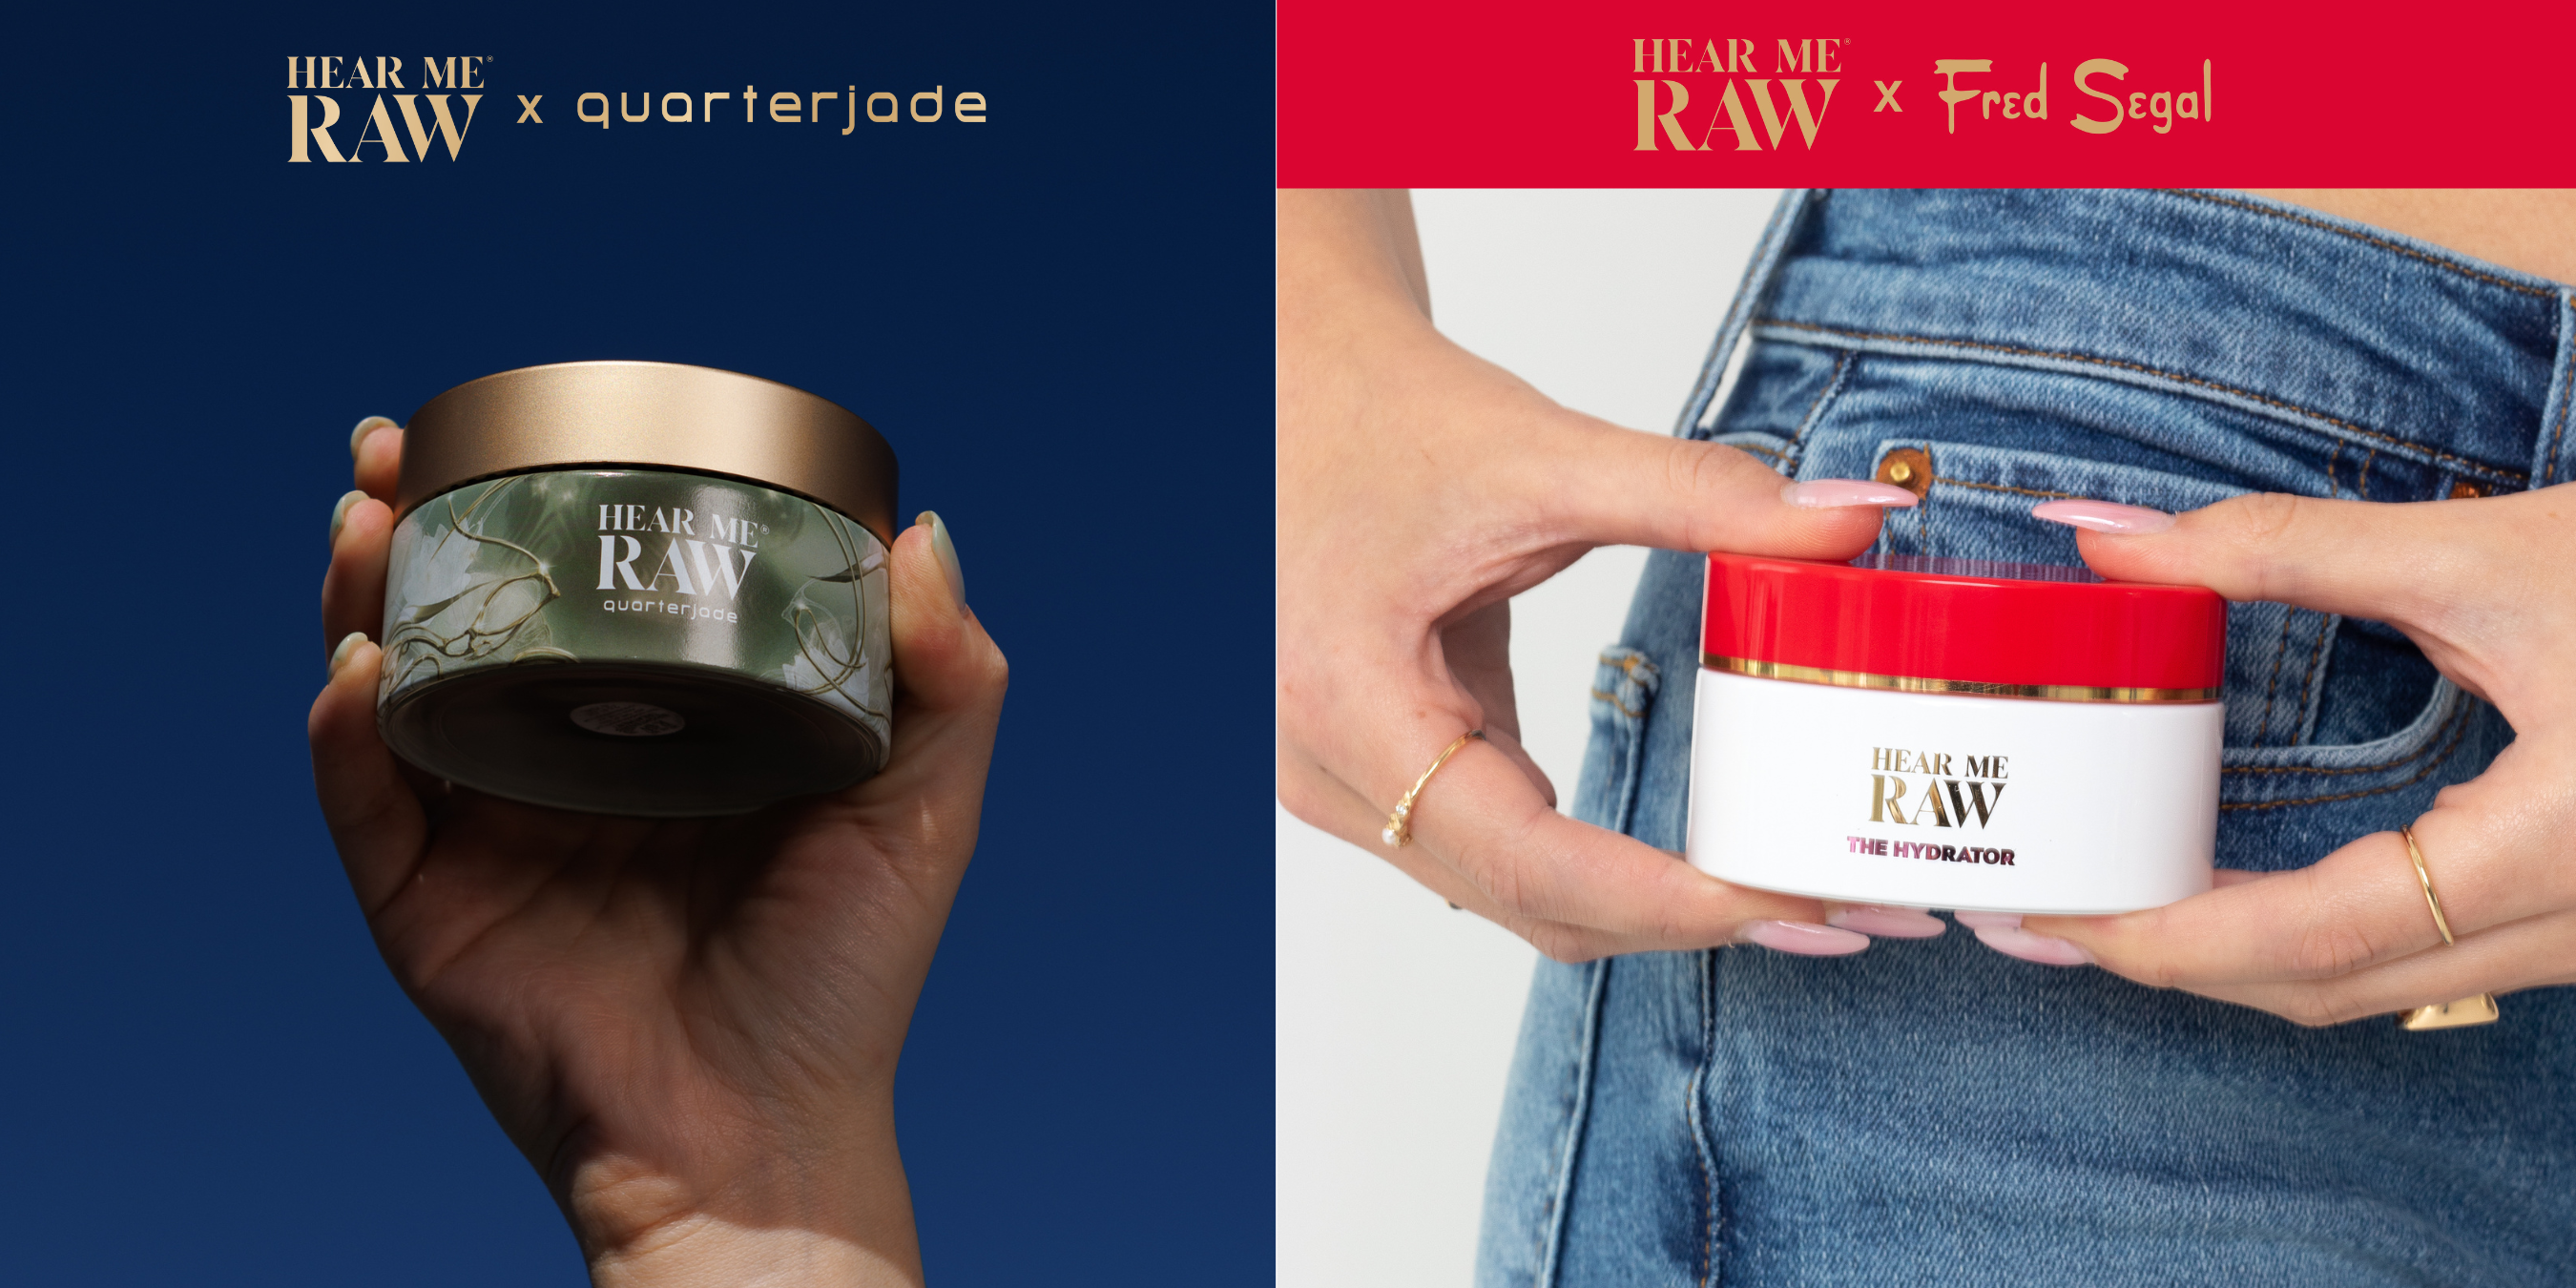 HEAR ME RAW's collaborations with the biggest names in fashion and entertainment to bring awareness to the importance of refillable packaging